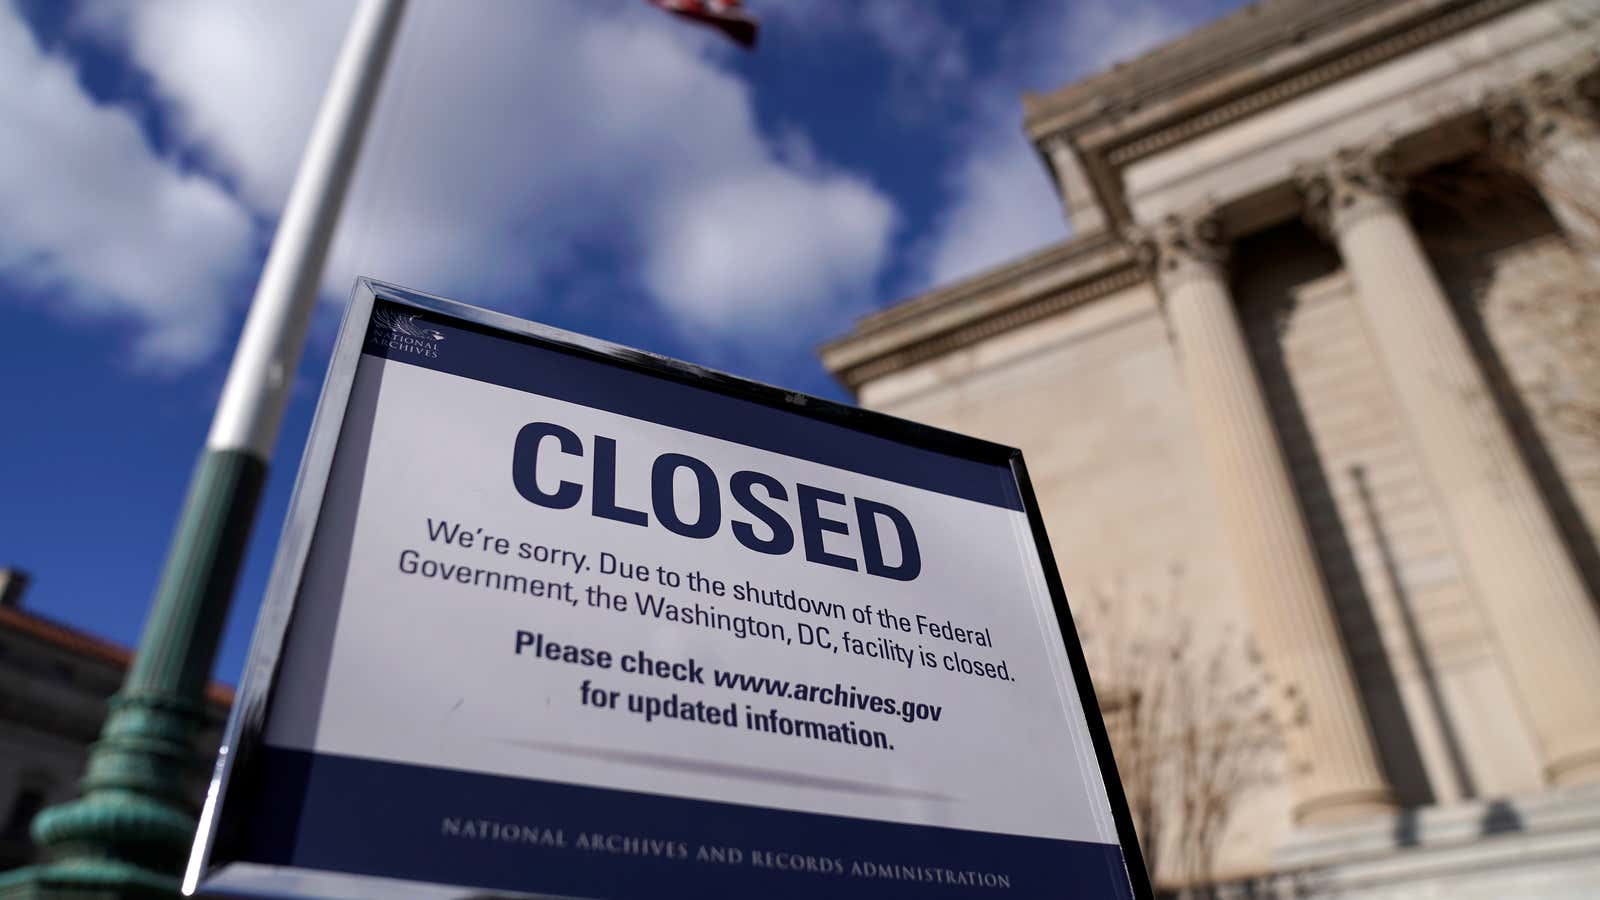 The National Archives, closed down in real life, and online.